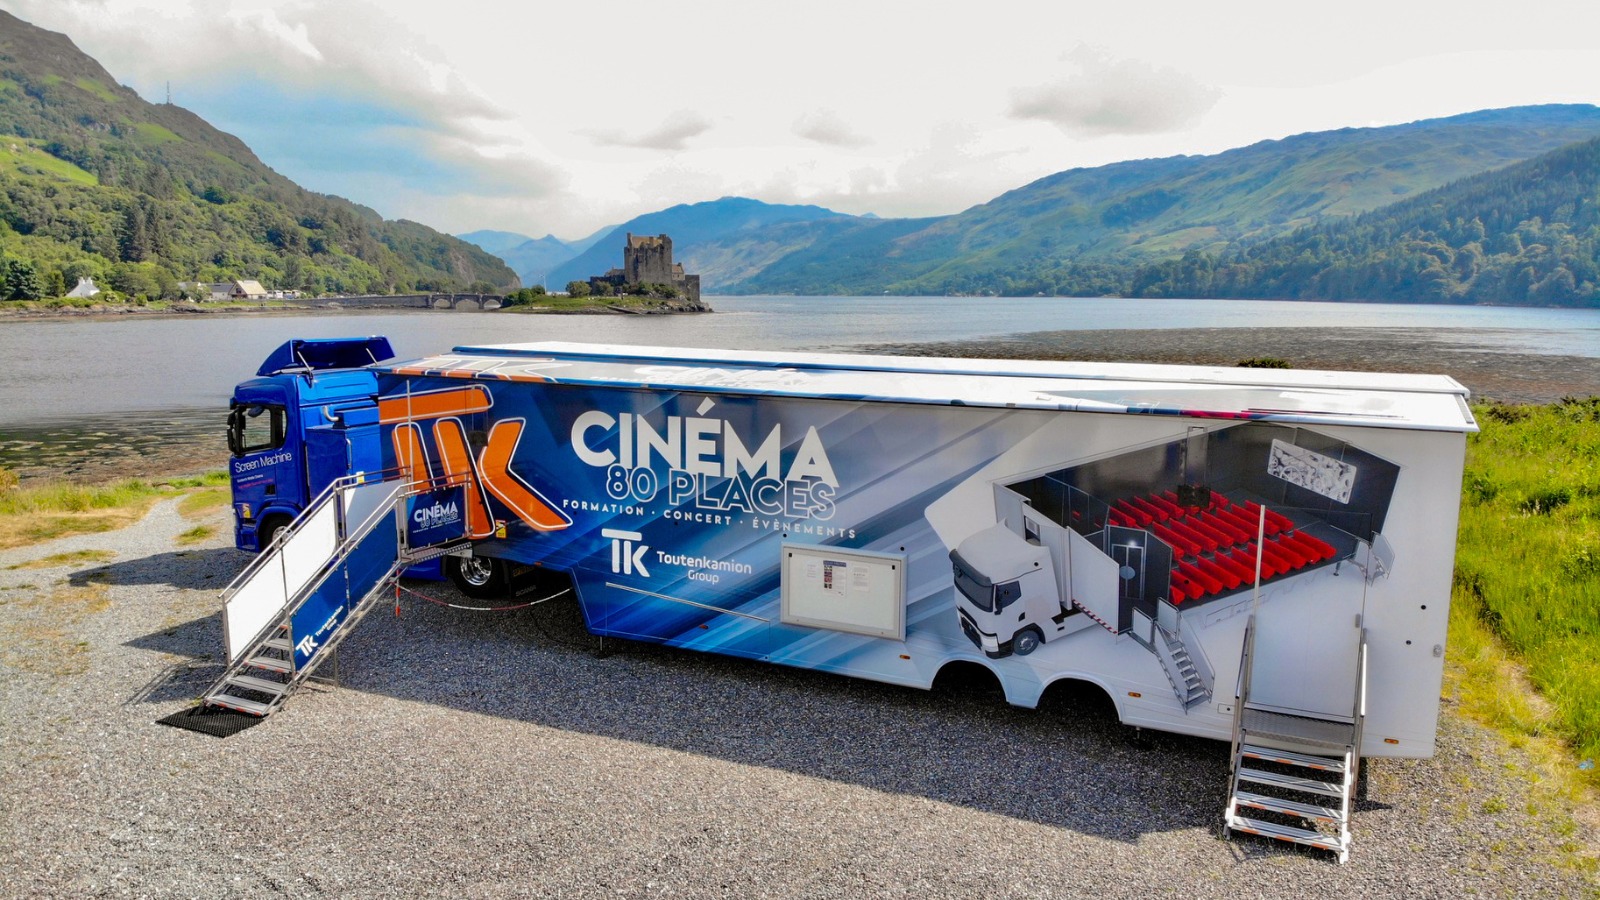 The Cinemobile sits parked in Dornie by Eilean Donan castle. Photo by Iain MacColl.